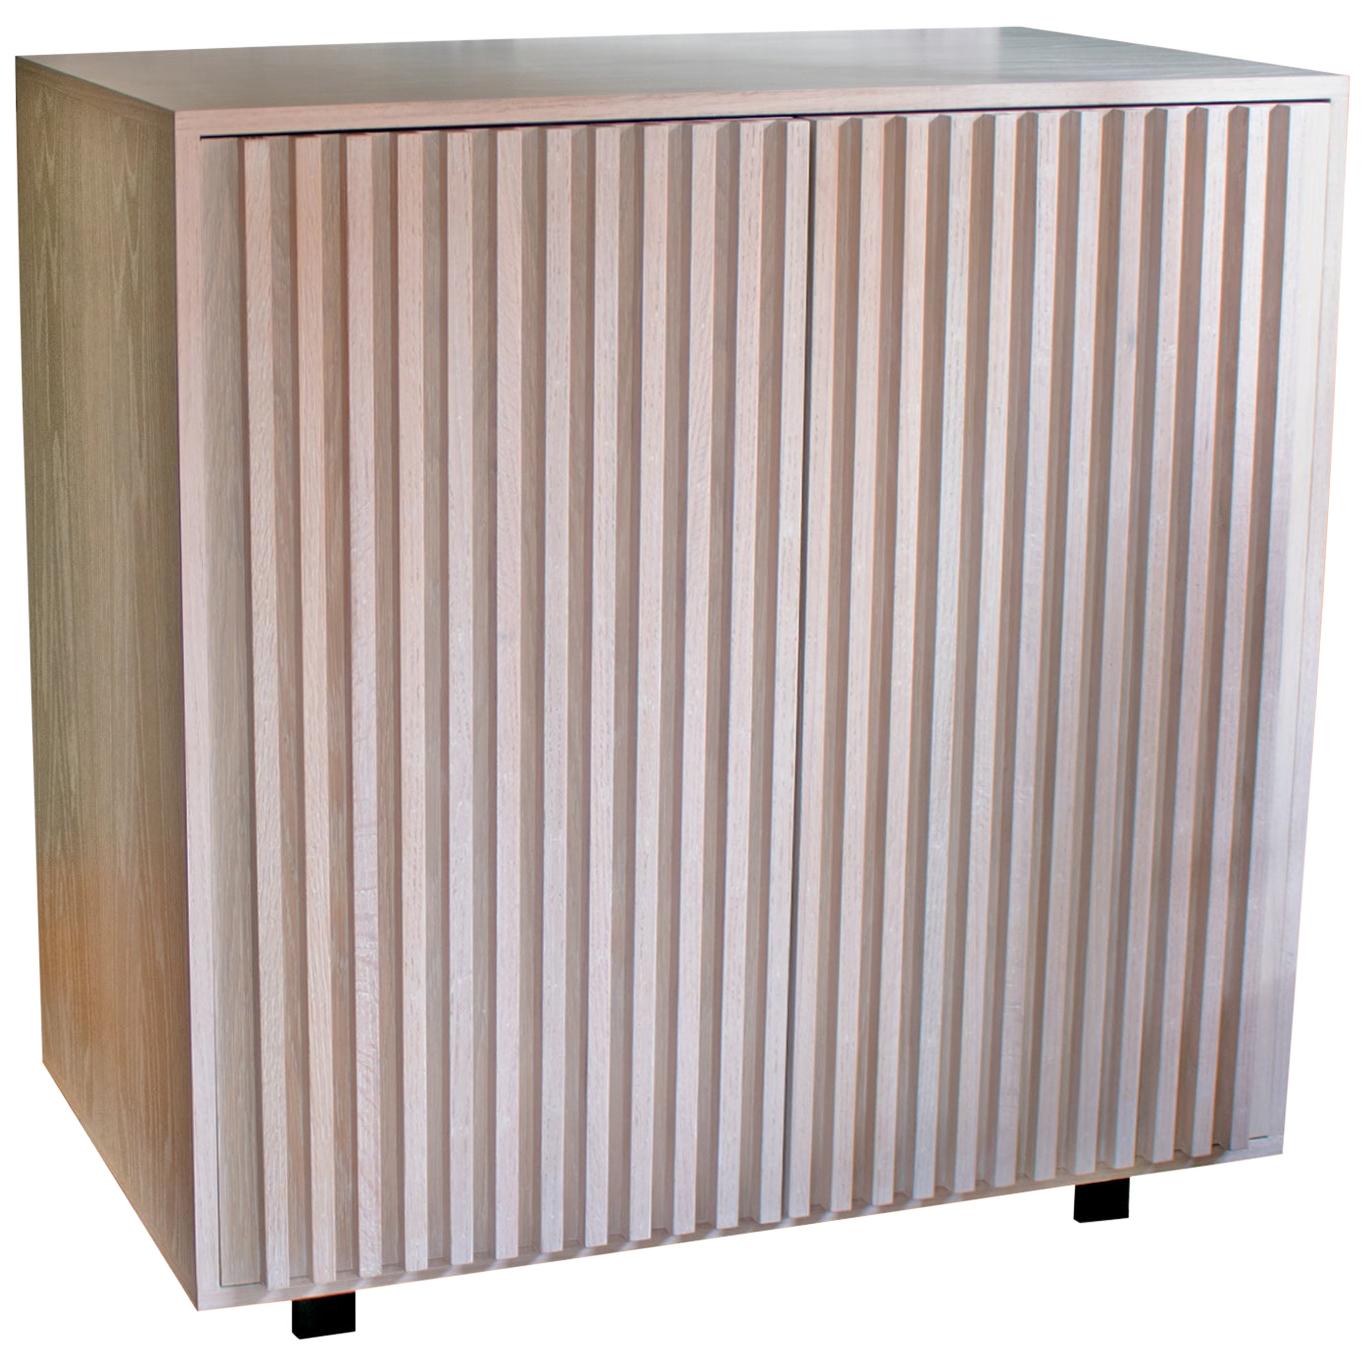 Constantine Oak Storage Cabinet with Slatted Doors in Silver/Grey Finish